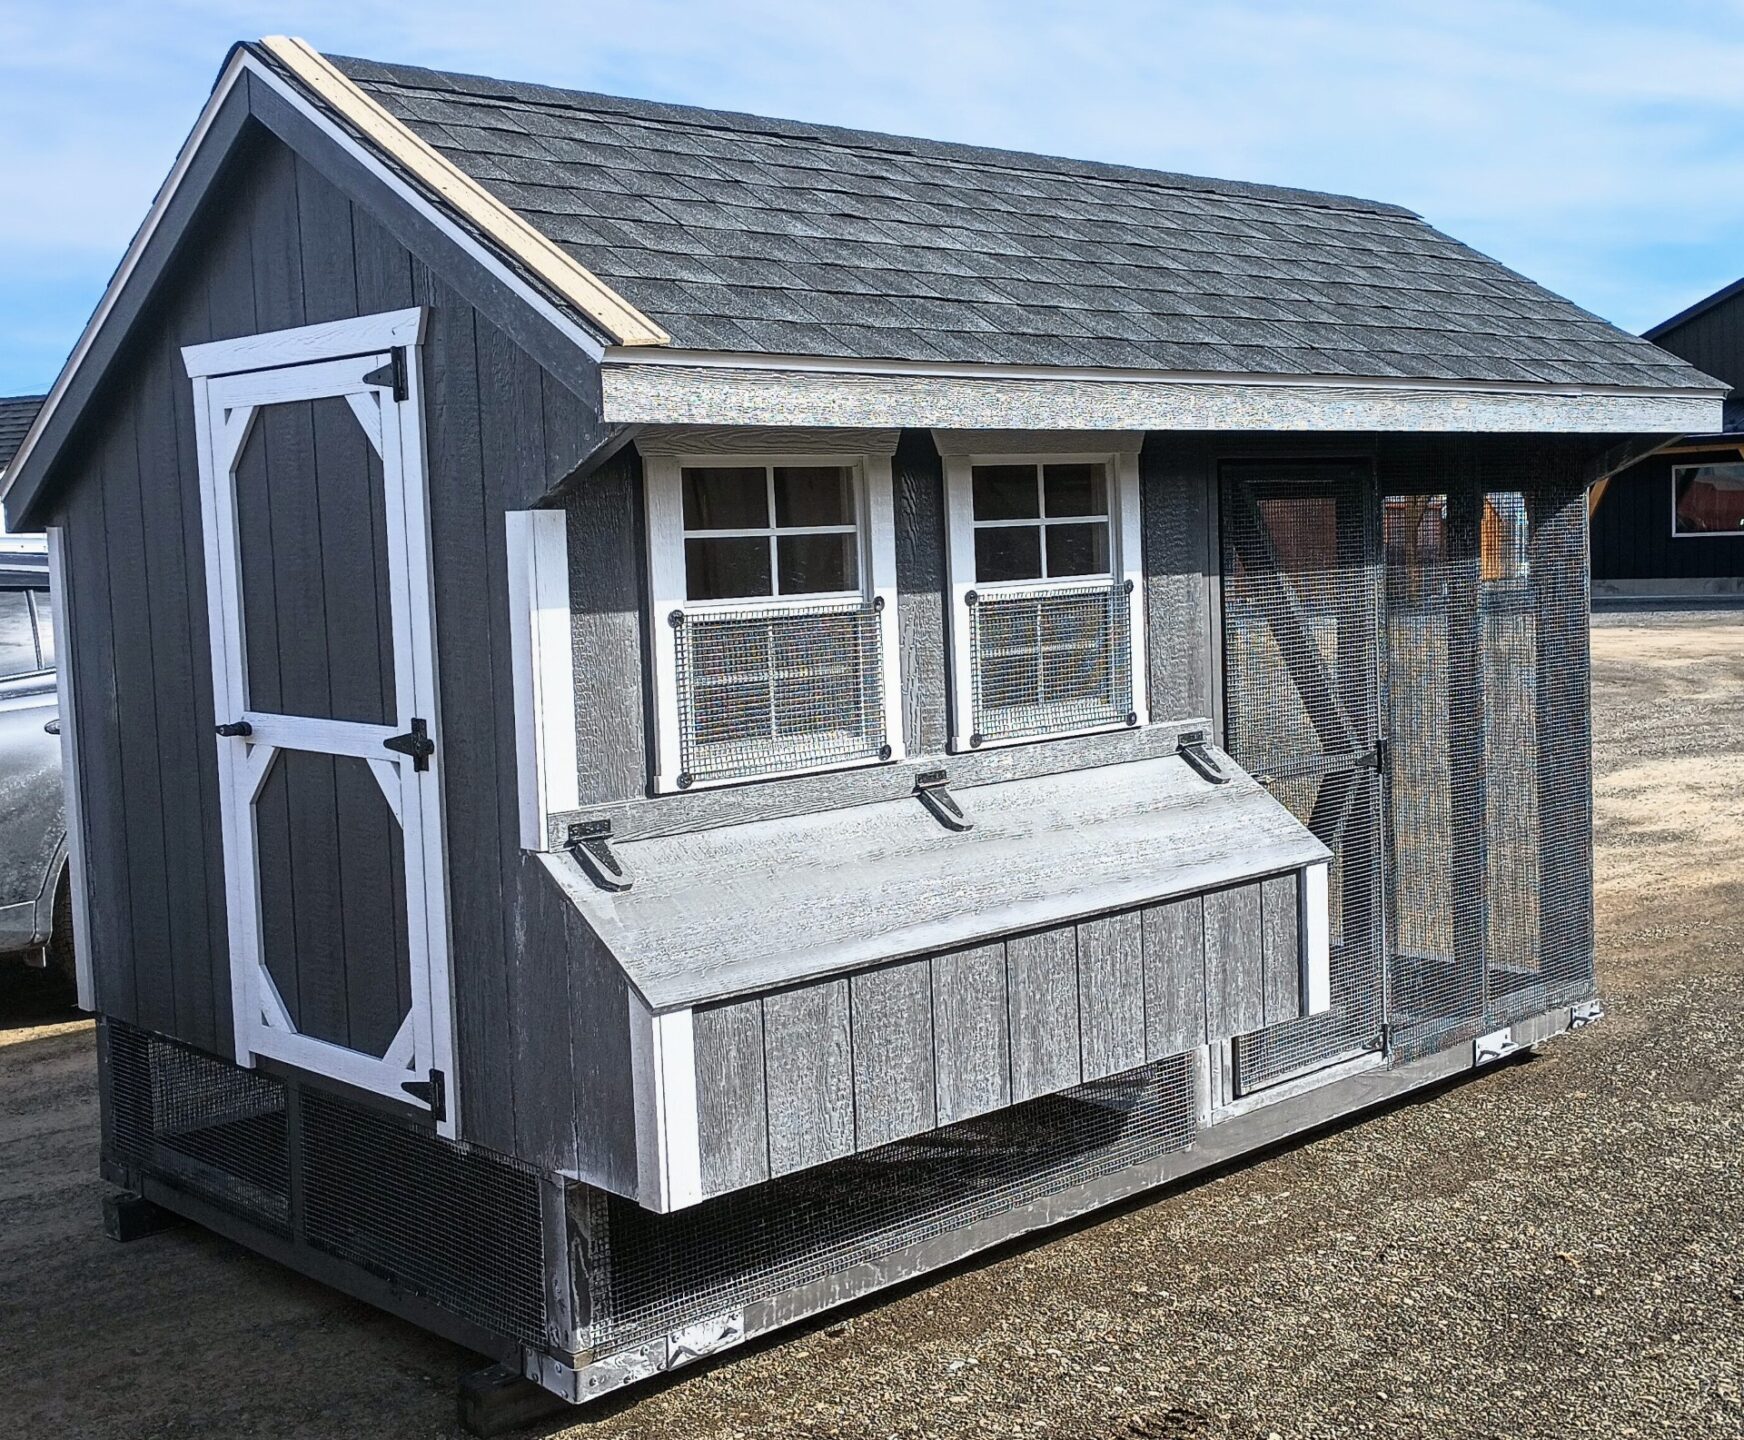 Dark gray combination coop with white trim, entry door, 2 windows and nesting boxes